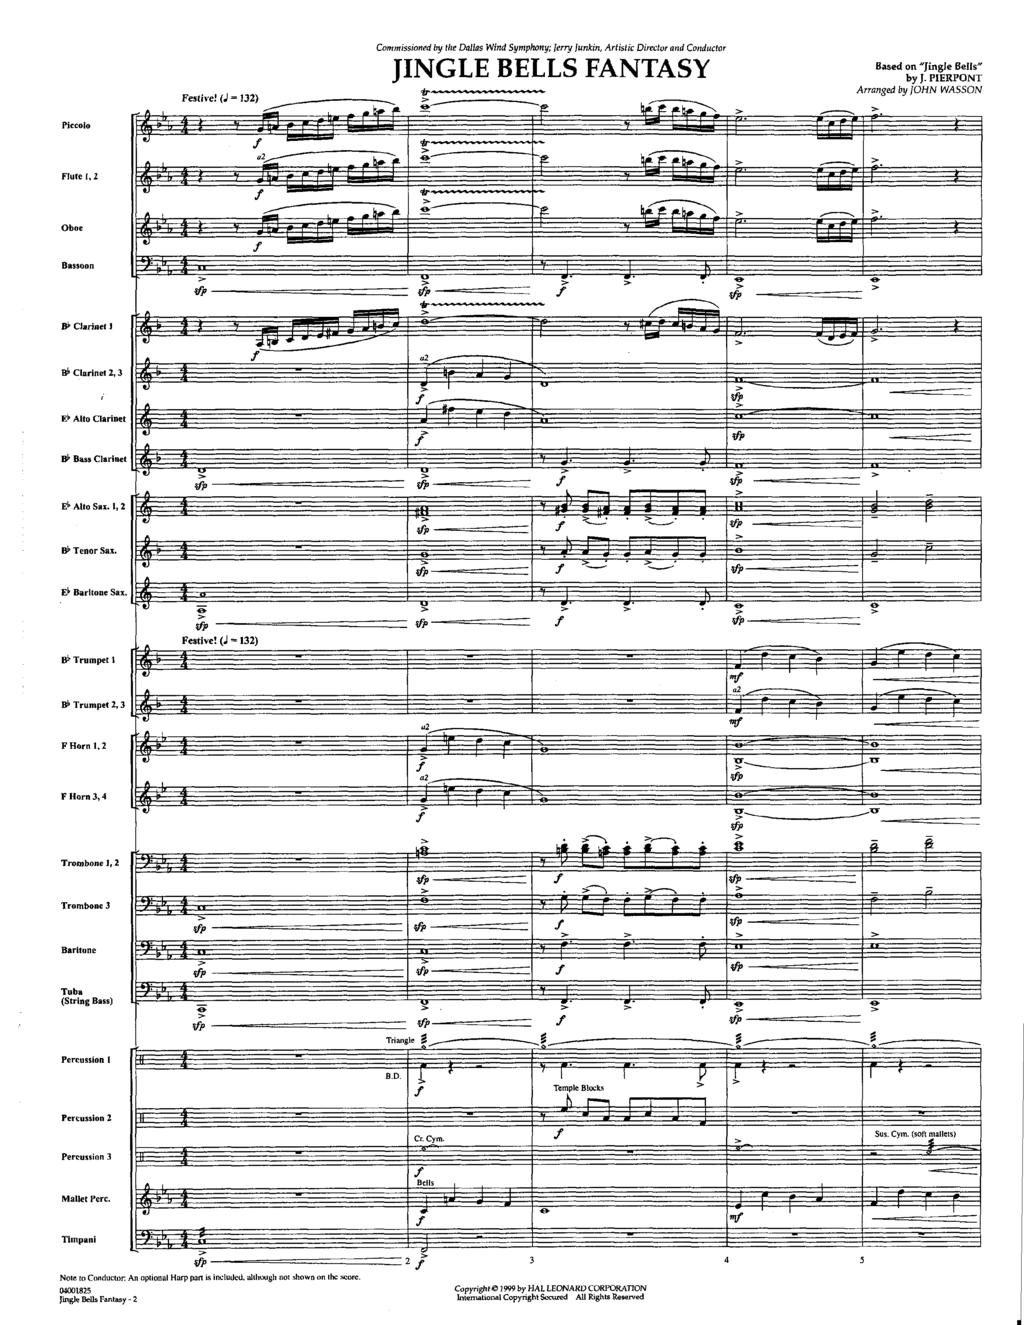 Festive! (J -132) Commissioned by the Dallas Wind Symphony; Jerry fimkin, rtistic Director and Conductor JINGLE BELLS FNTSY Based on "Jingle Bells" byj.